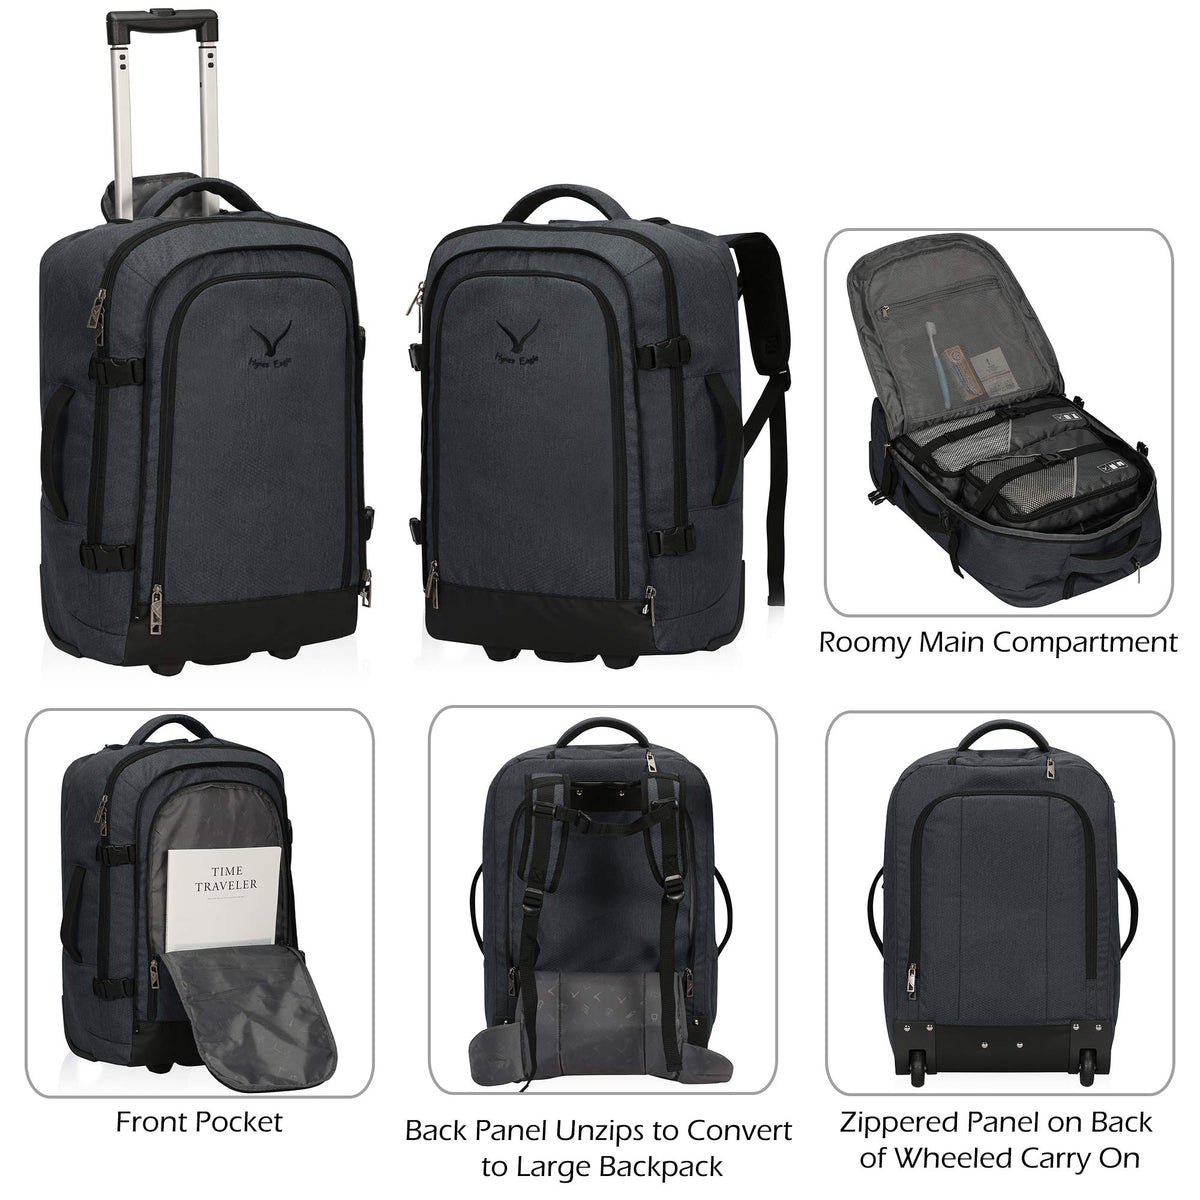 Hynes Eagle Travel Pack: Travel Backpack, Carry on Luggage, Packing Cubes (3PCS)